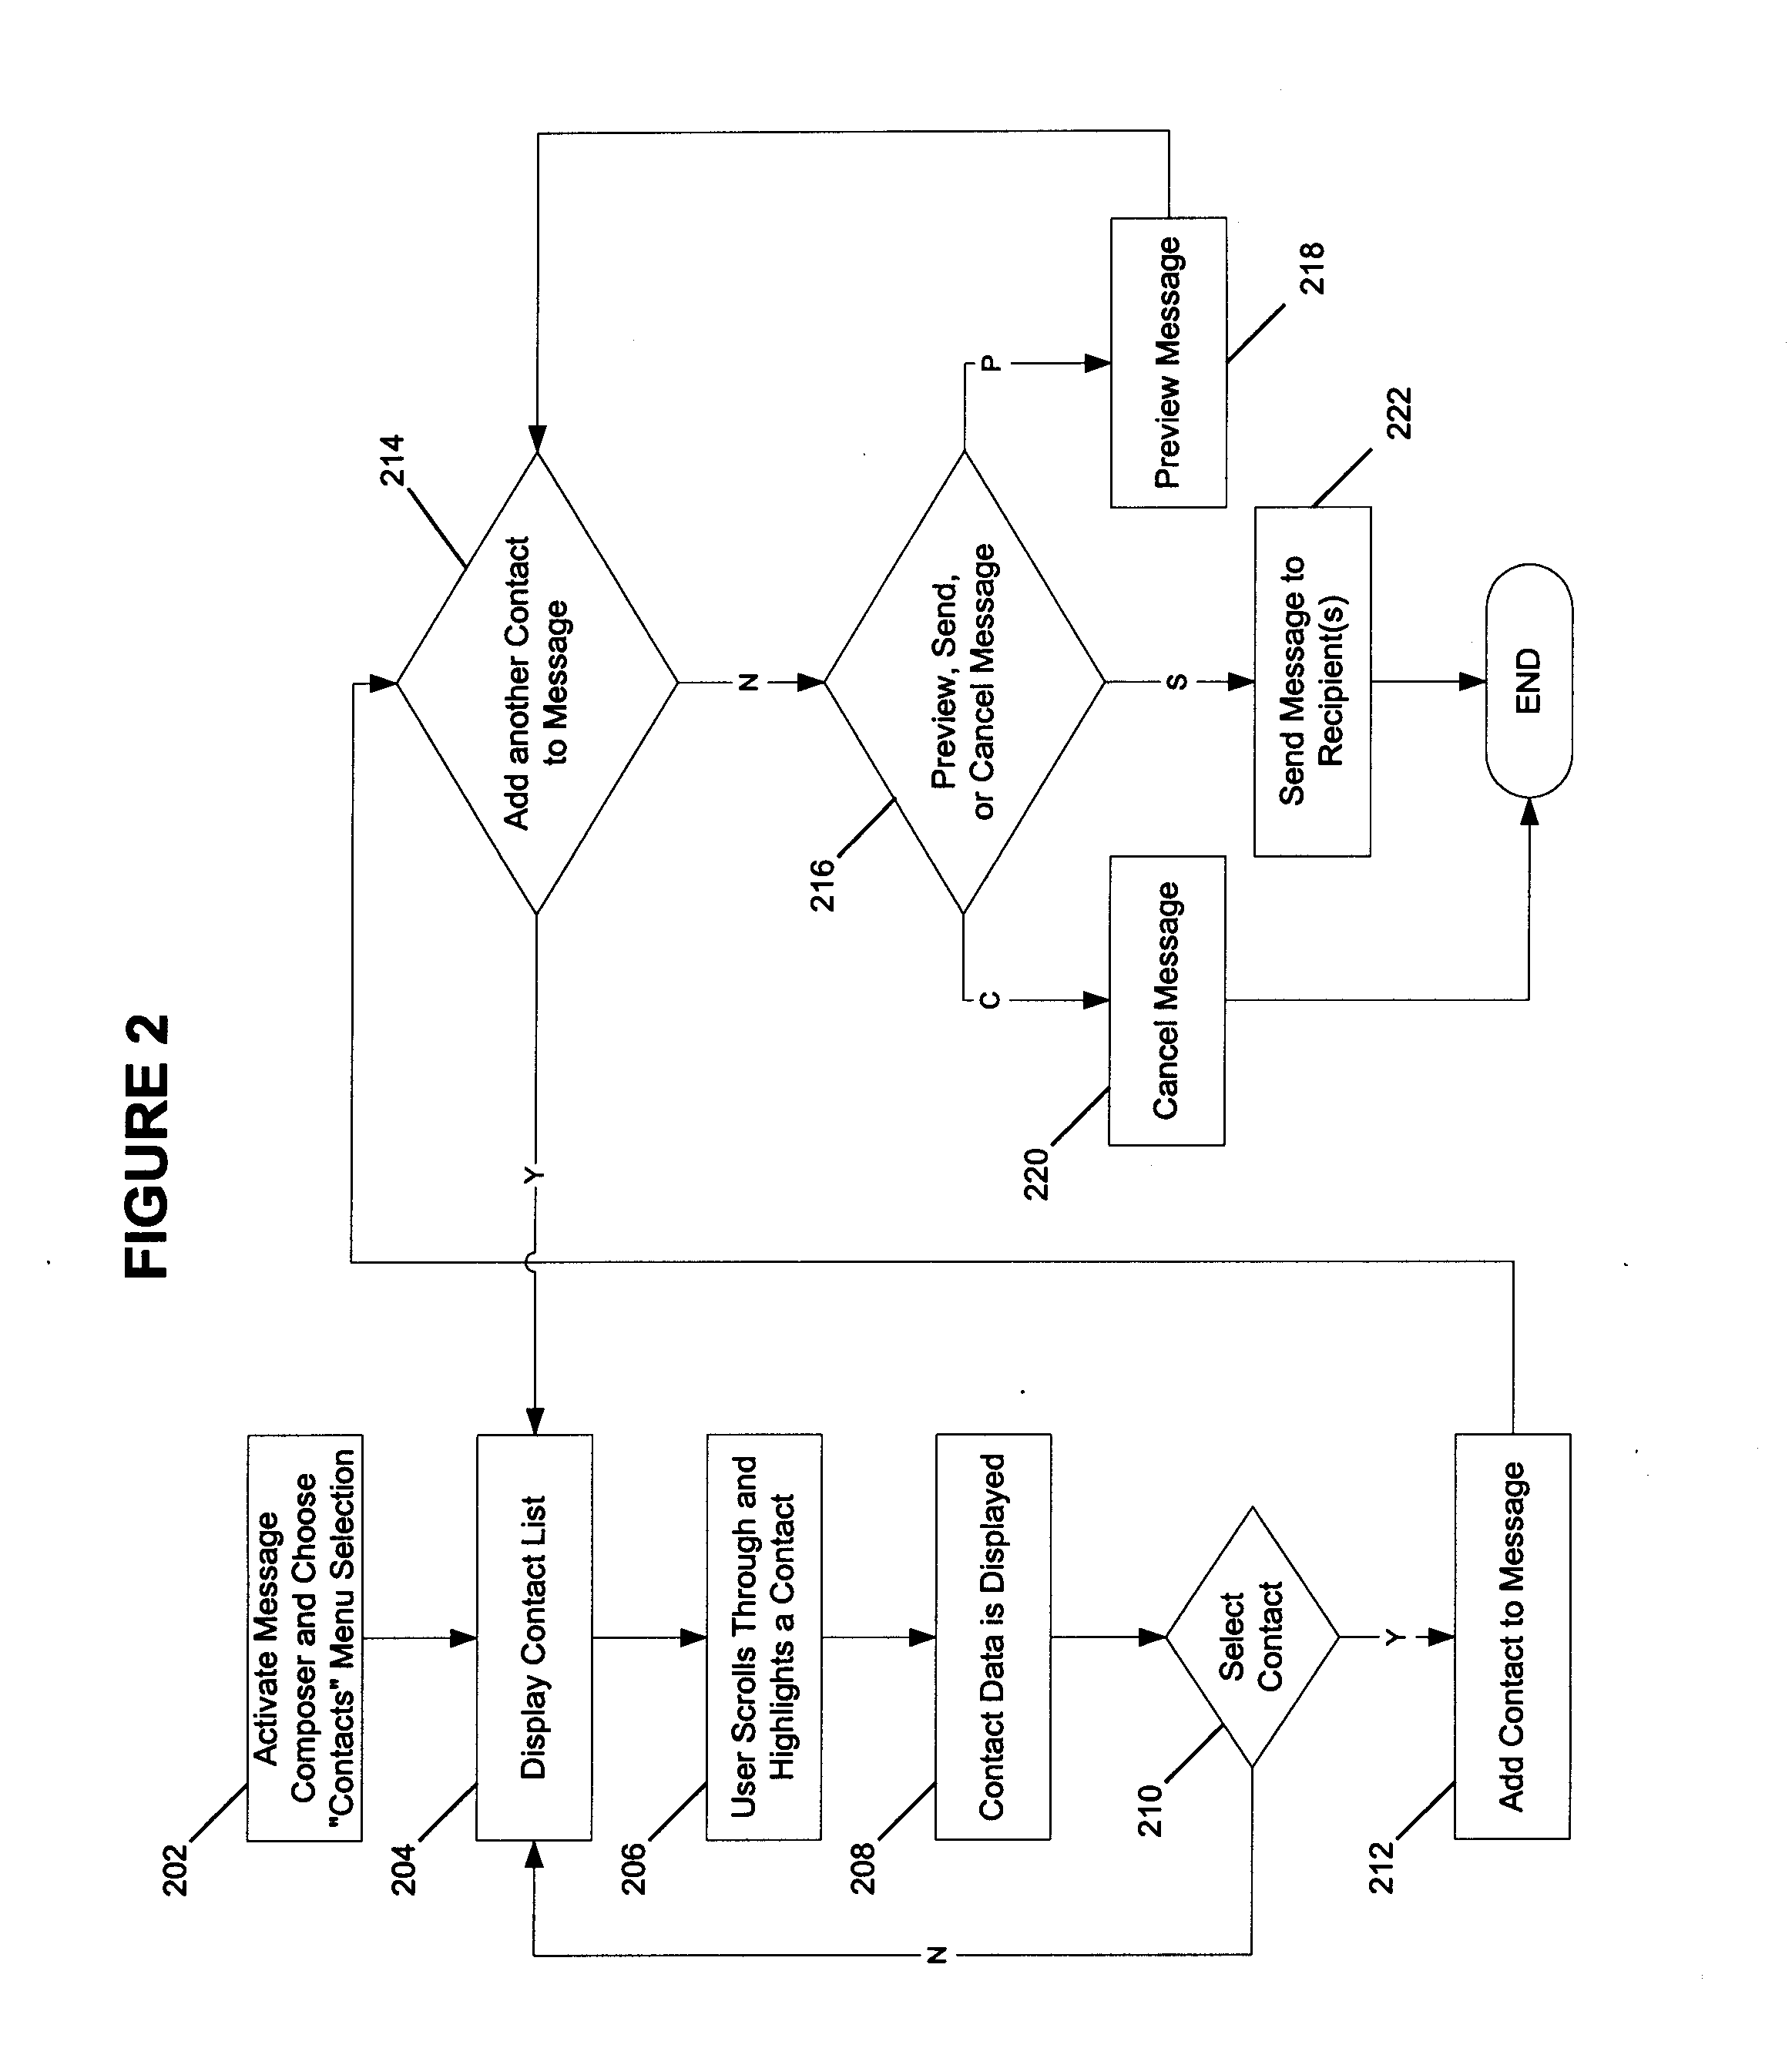 System and Method of Sharing a Contact List Among Mobile Phones